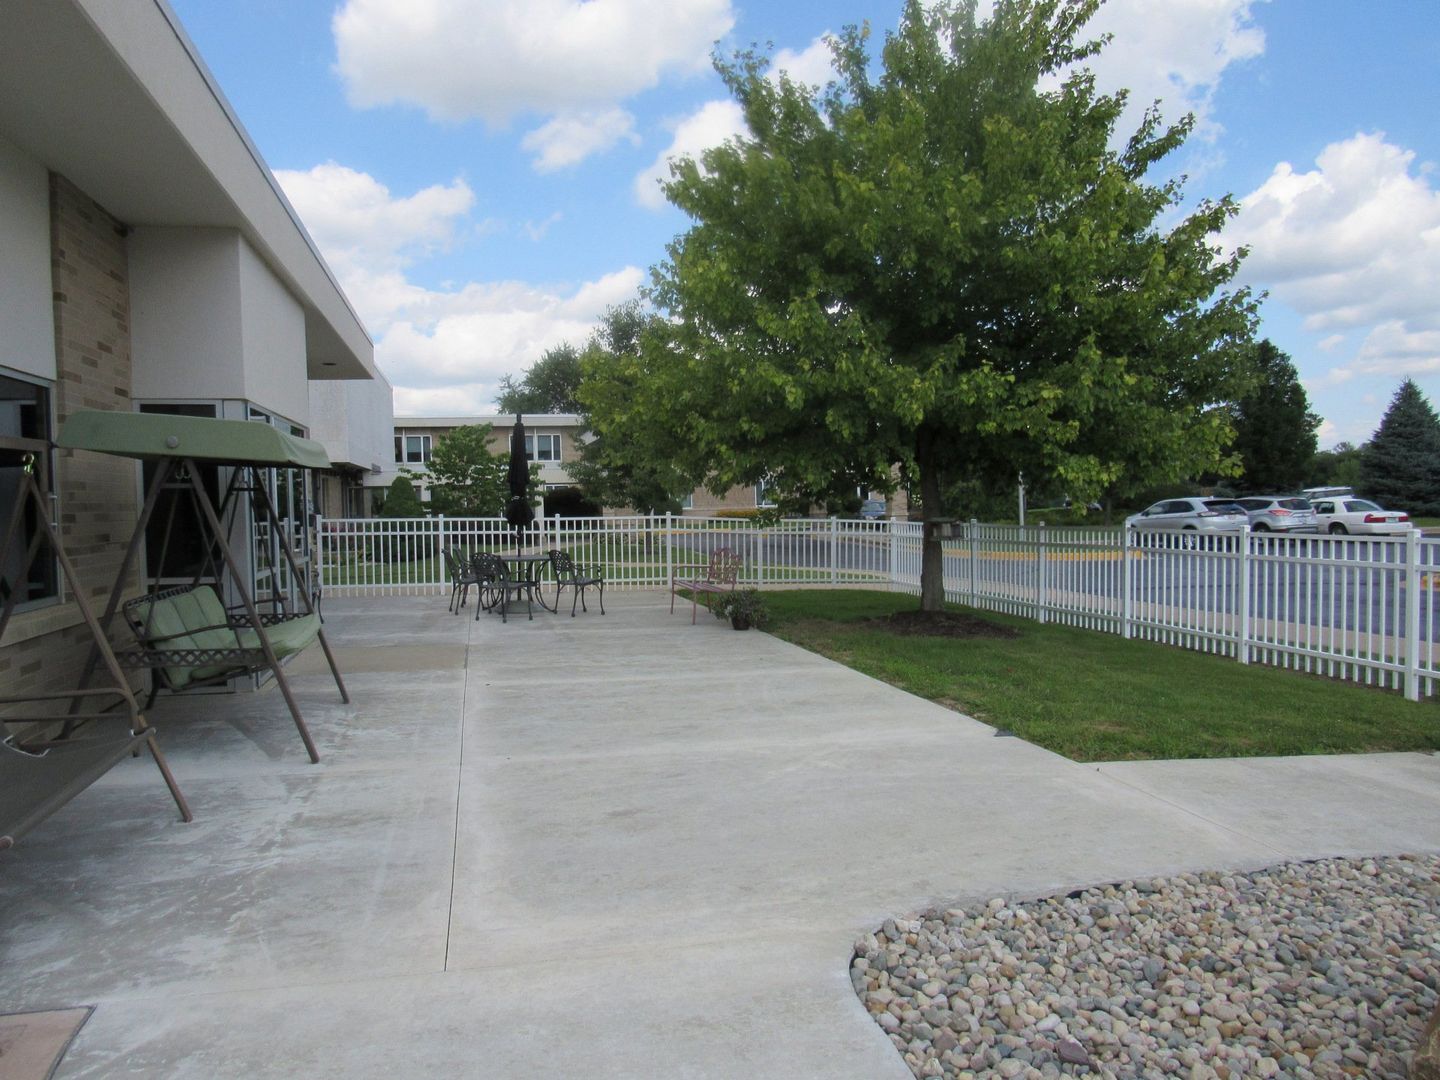 Outdoor sitting area at Lenawee Medical Care Facility in Adrian, MI